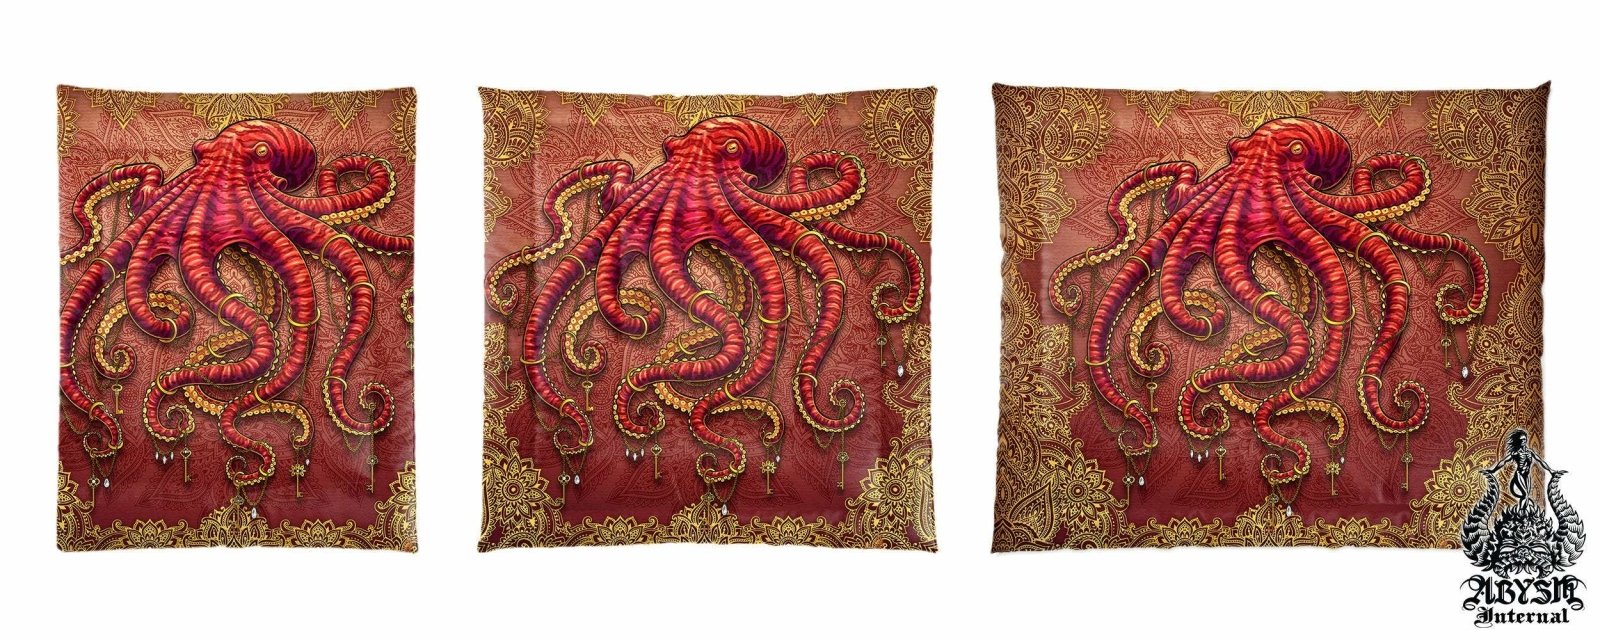 Boho Bedding Set, Comforter and Duvet, Beach Bed Cover, Coastal Bedroom Decor, King, Queen and Twin Size - Octopus - Abysm Internal